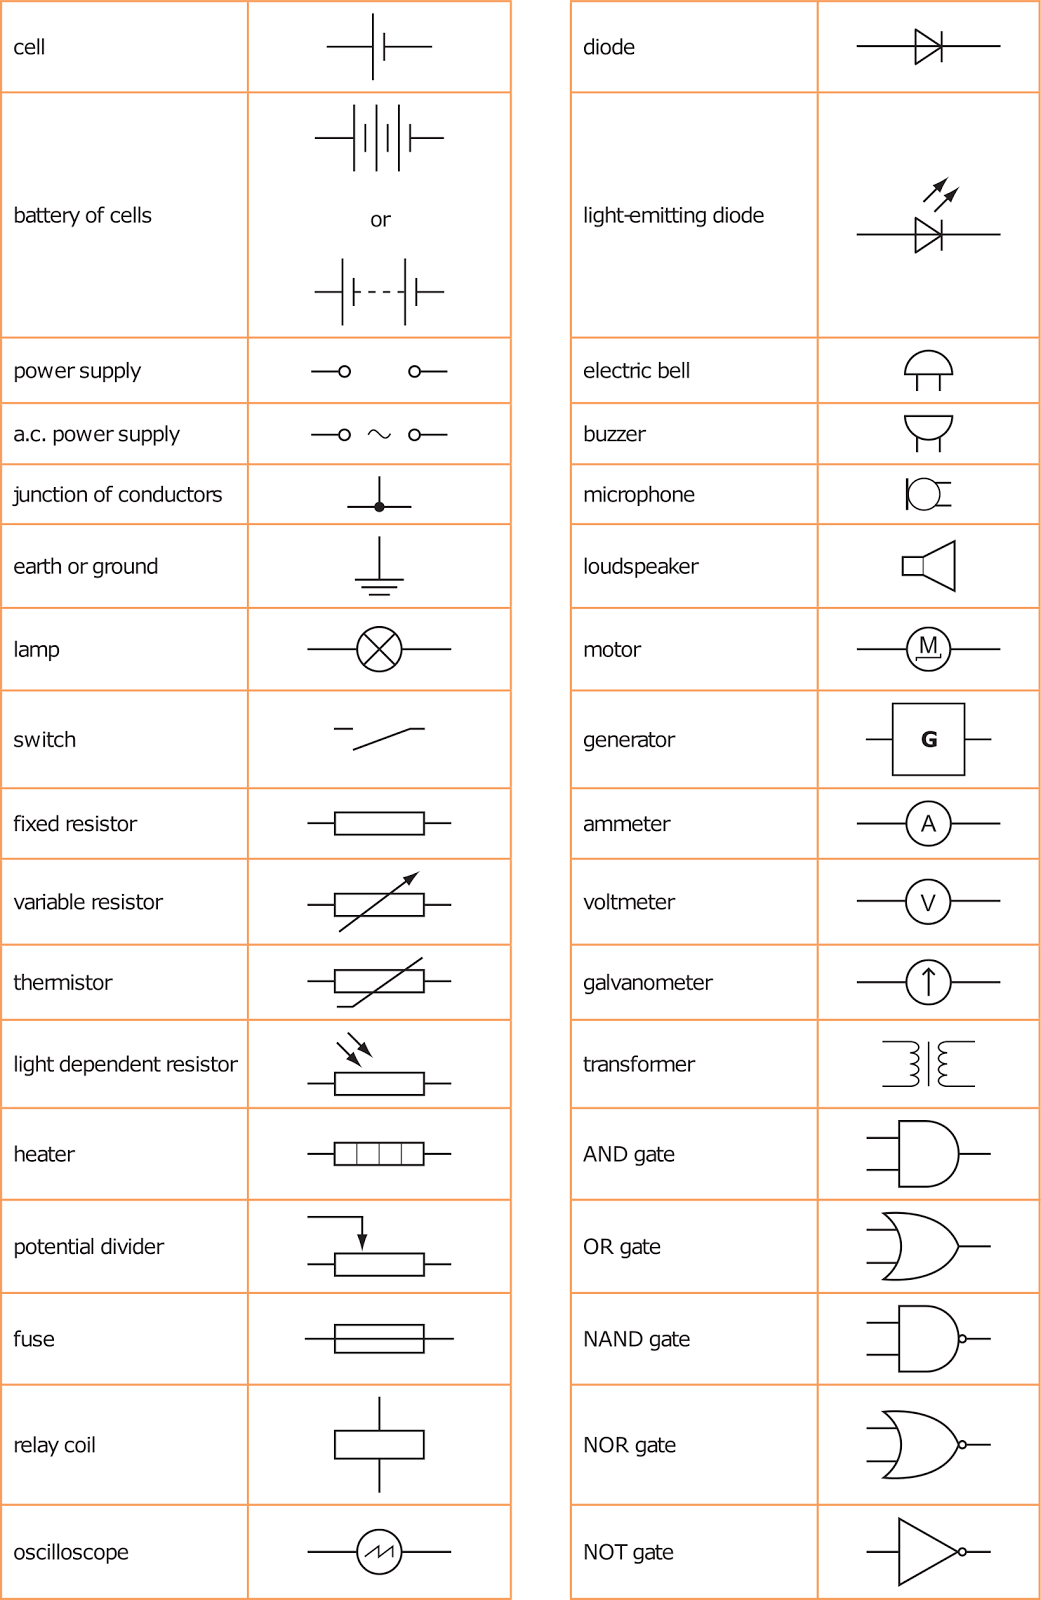 Table of component symbols